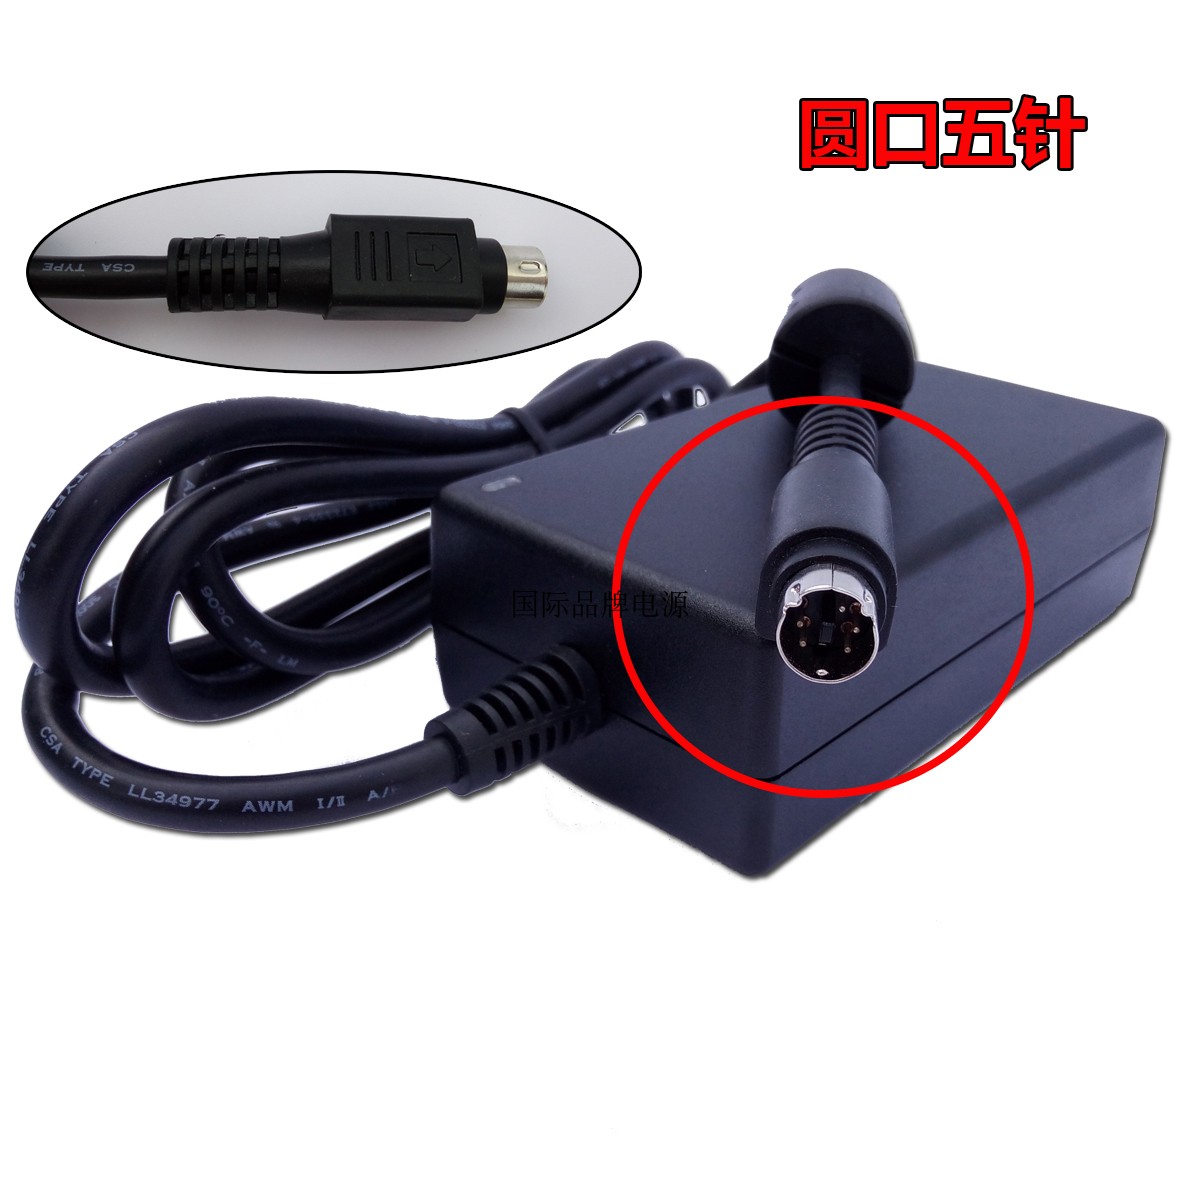 Keshuo 3.5 inch hard disk box power adapter serial port parallel hard disk box power cord 5V2A 12V2A 5-pin Pictures are